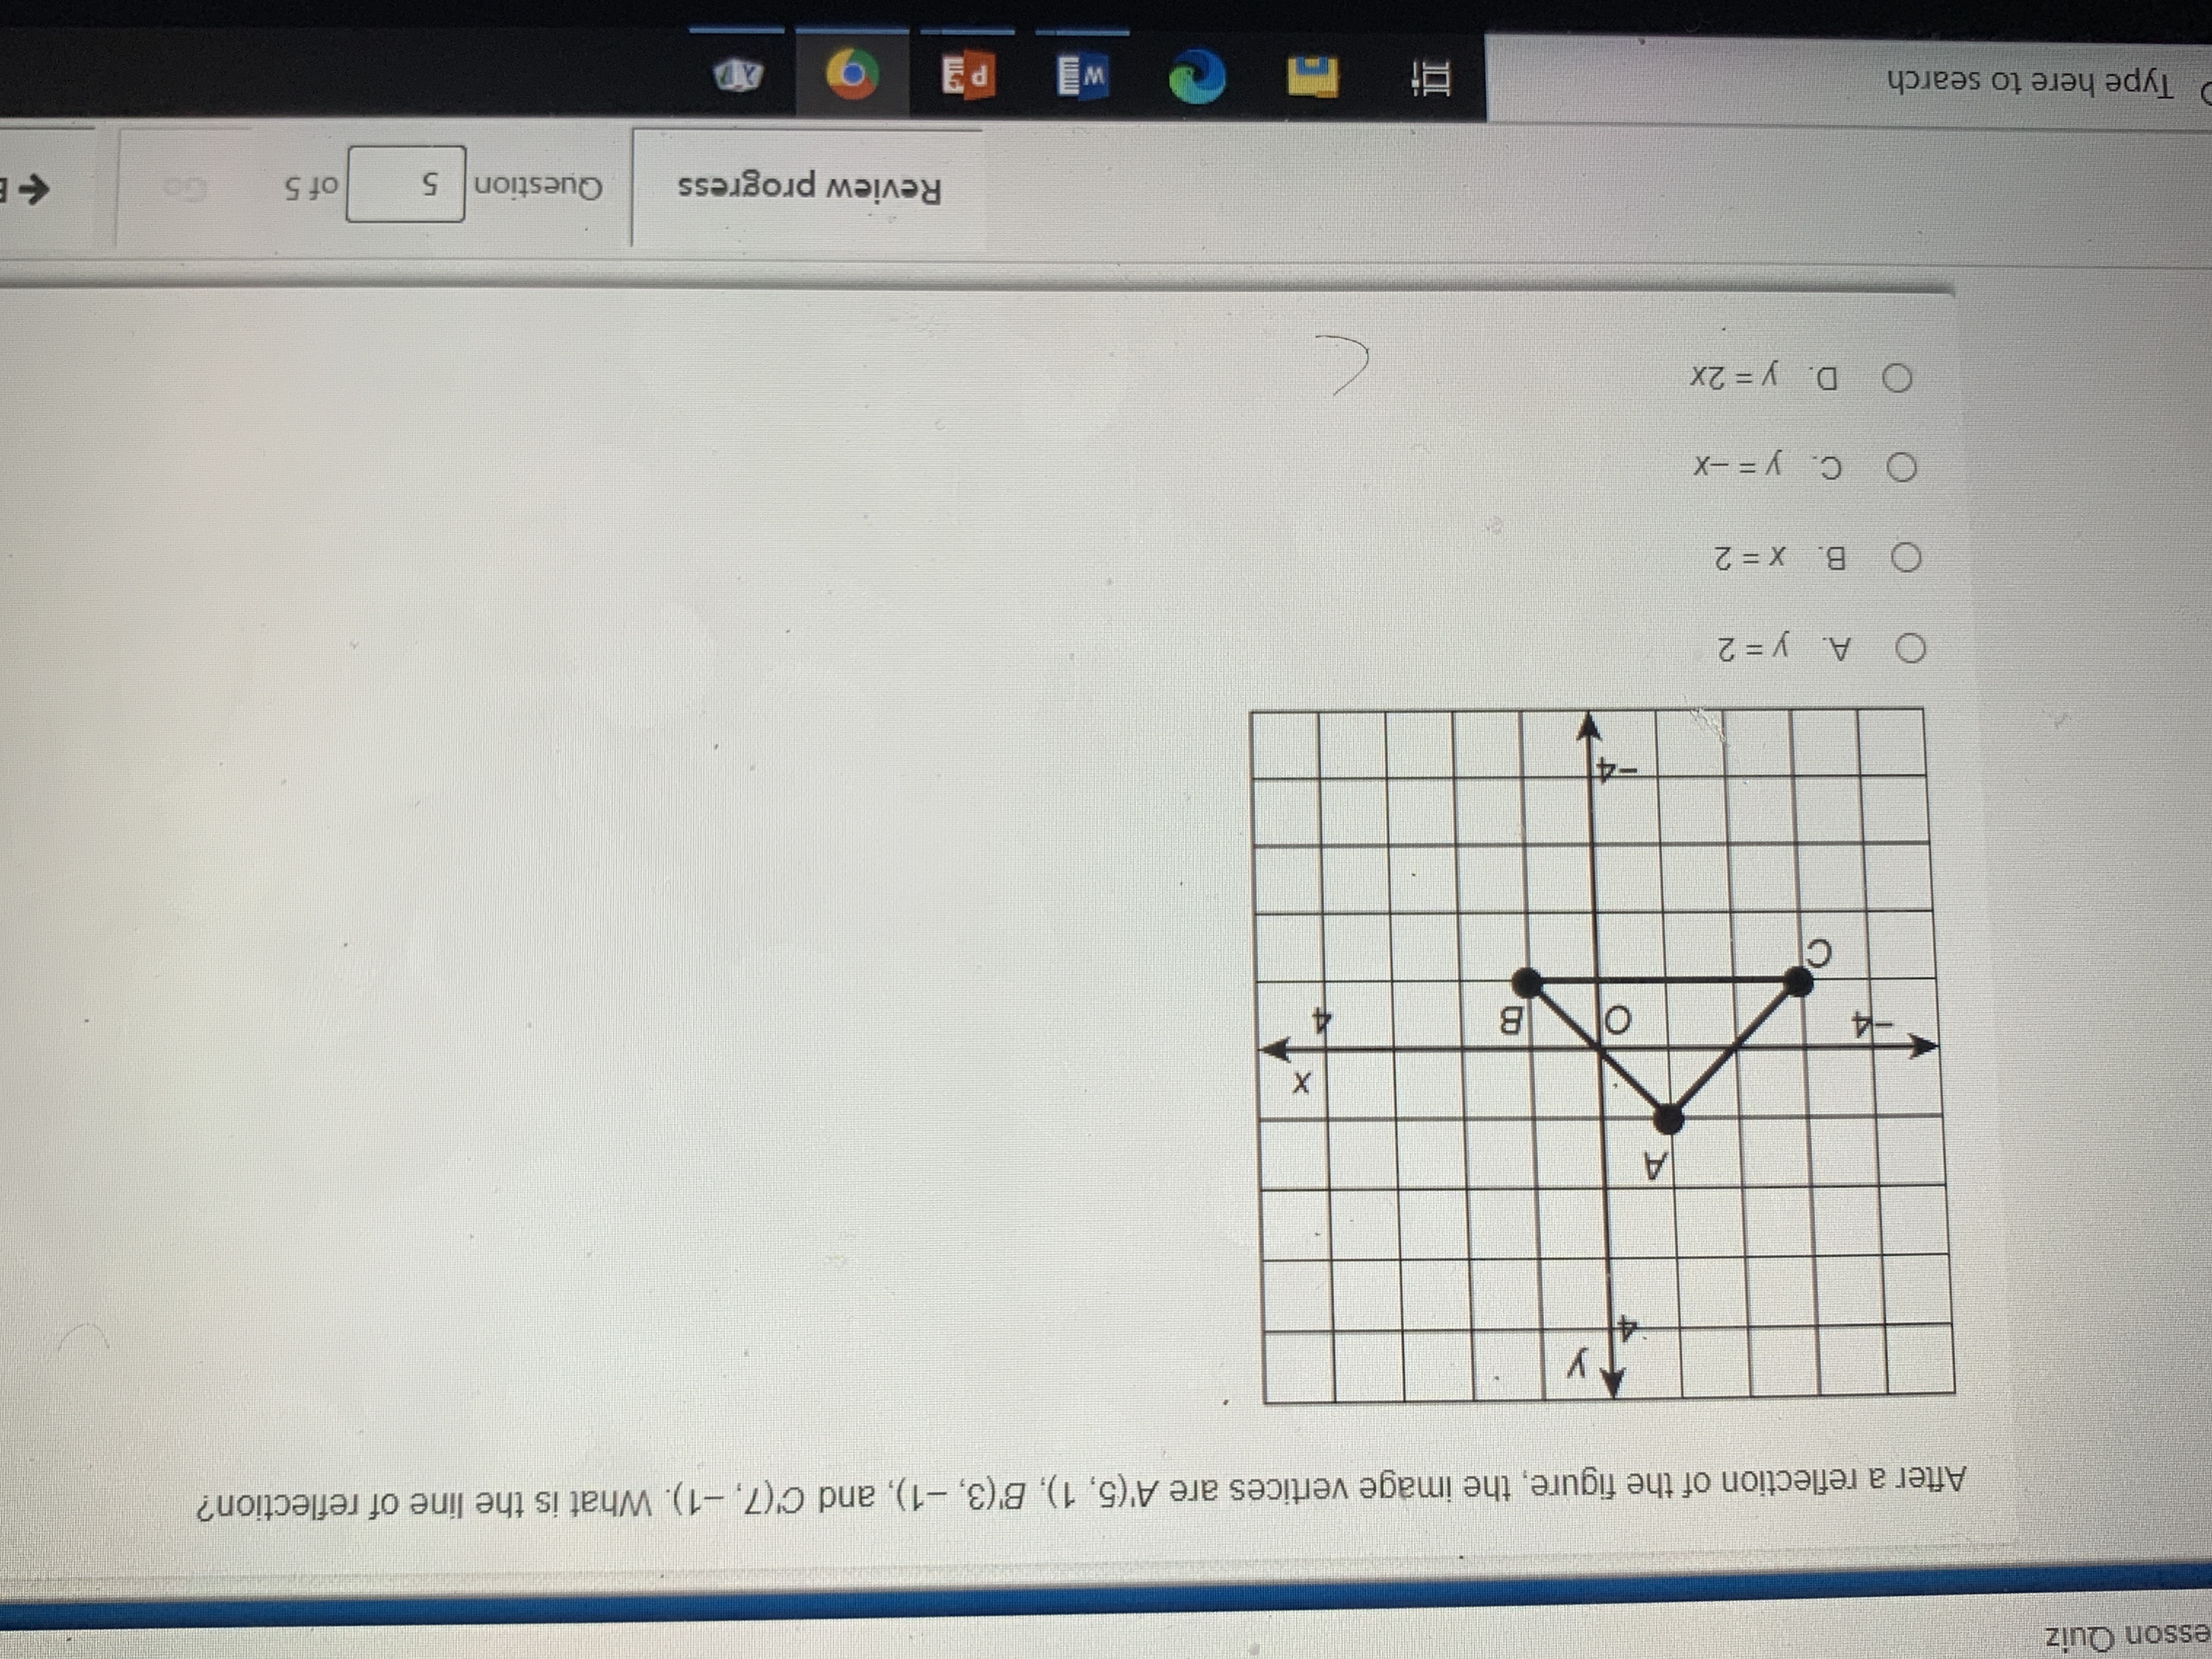 Answered: Reflect the figure over the line y = 1.…